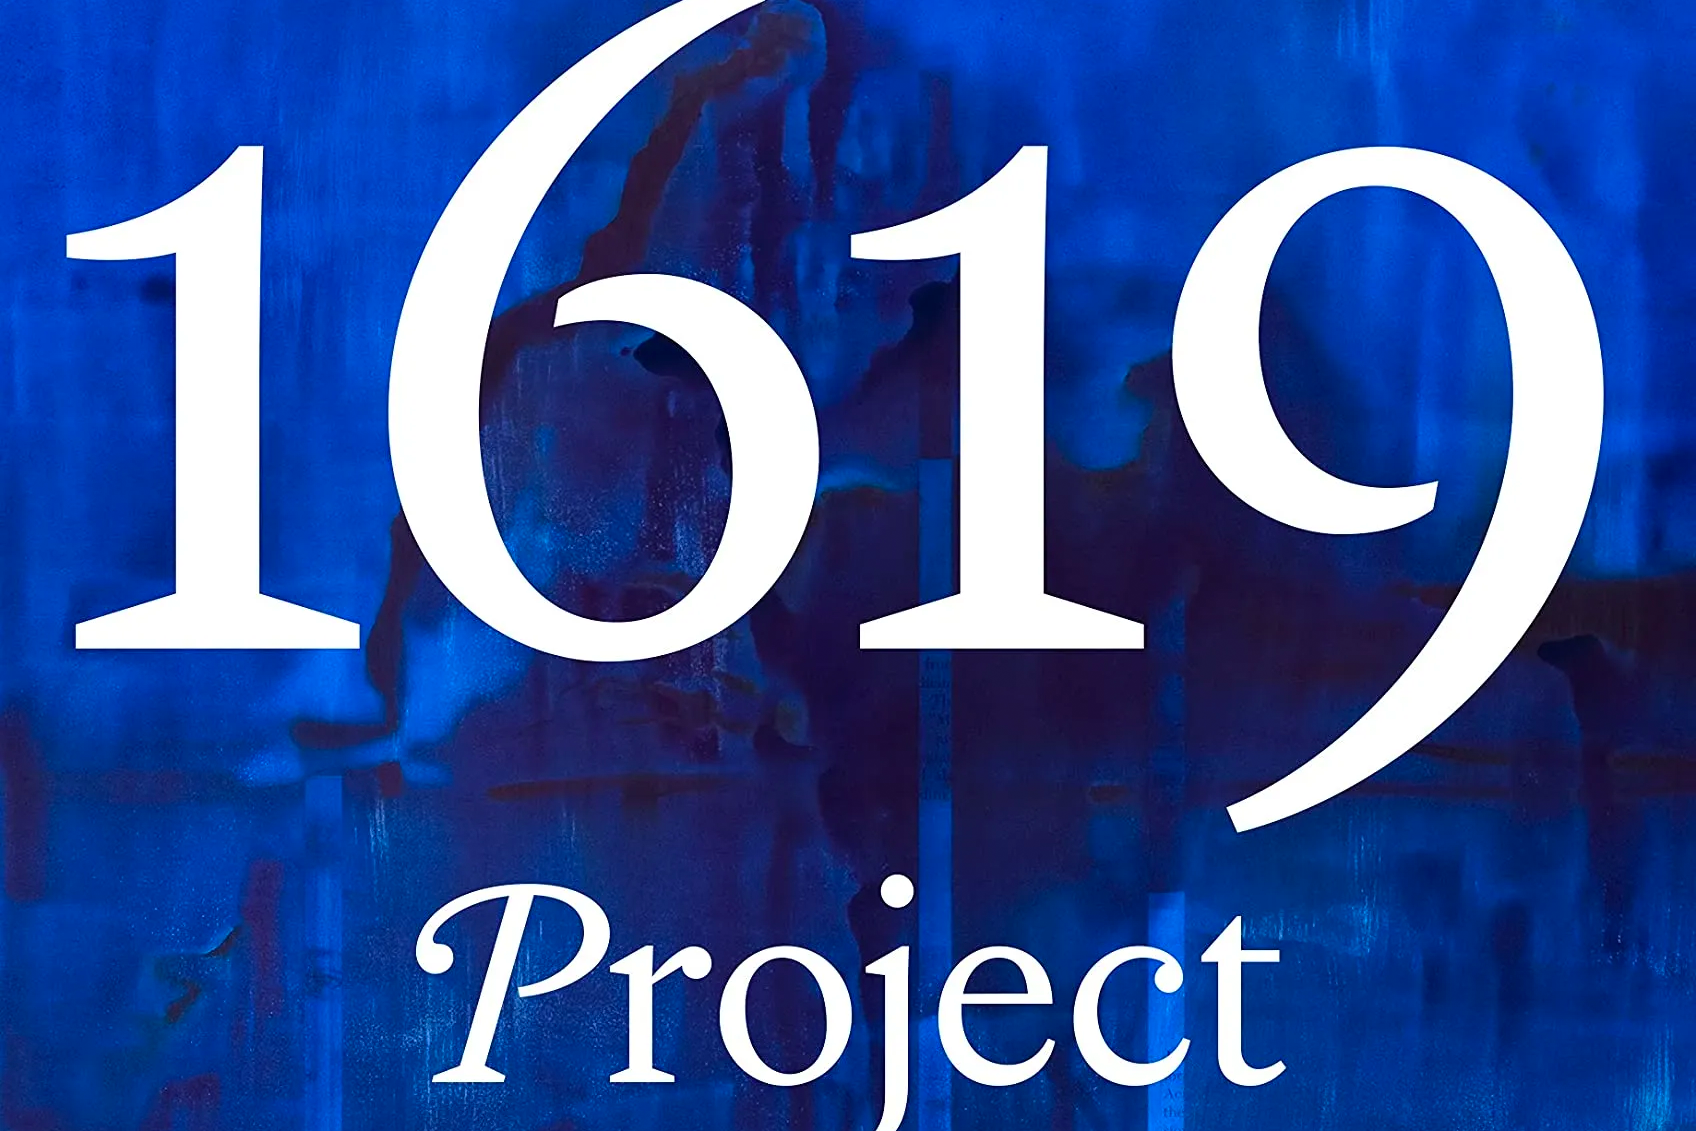 1619 project taught in schools